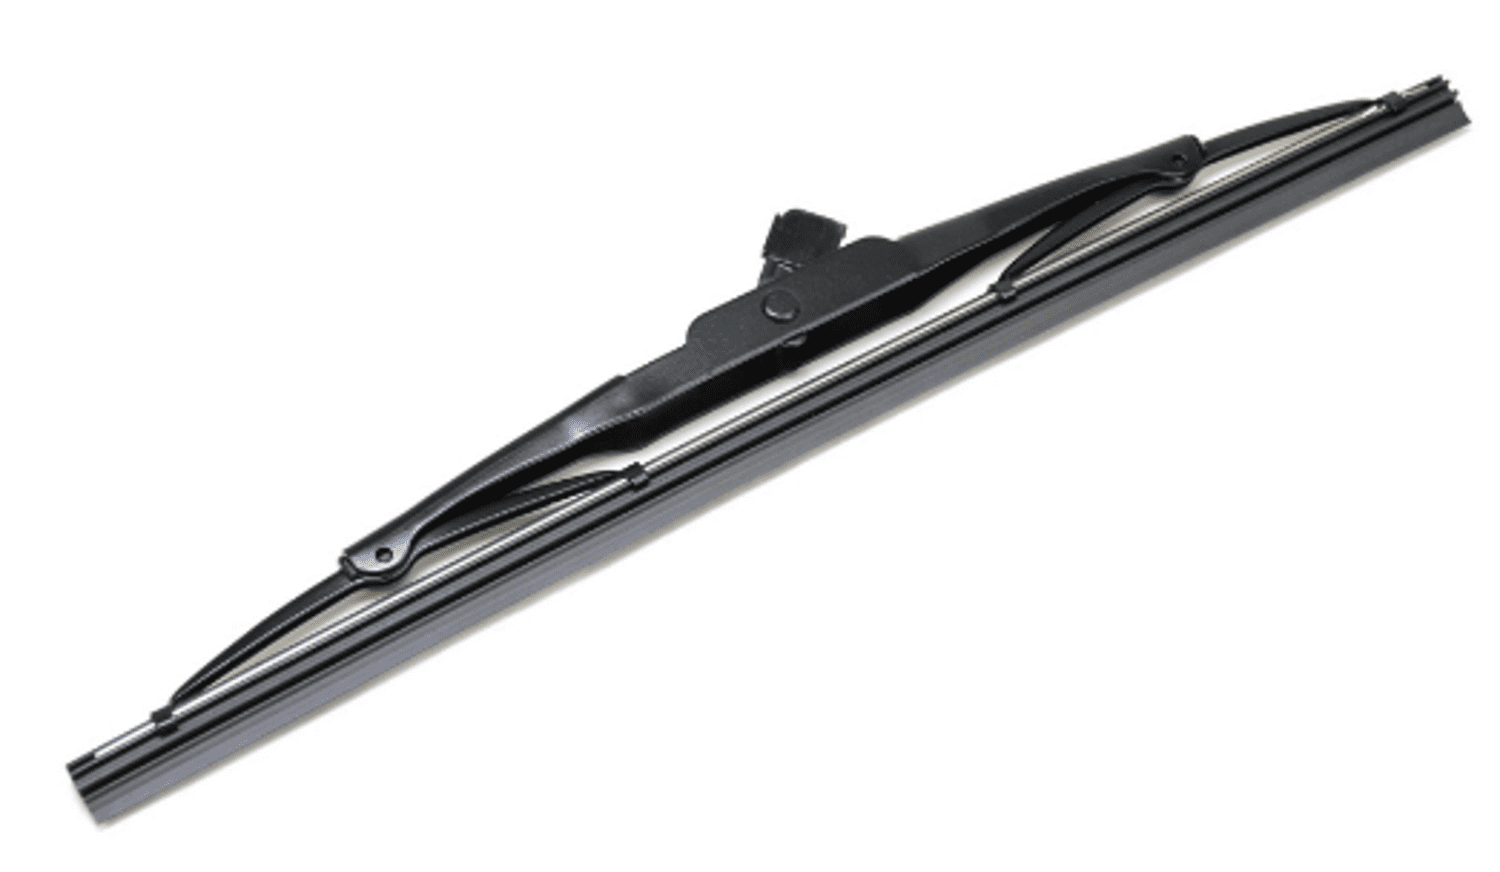 Factory New Mopar Part #5183276-AA Rear Wiper Blade for 2007-2012 Dodge Caliber, 2007-2017 Jeep 2017 Jeep Compass Rear Wiper Blade Size